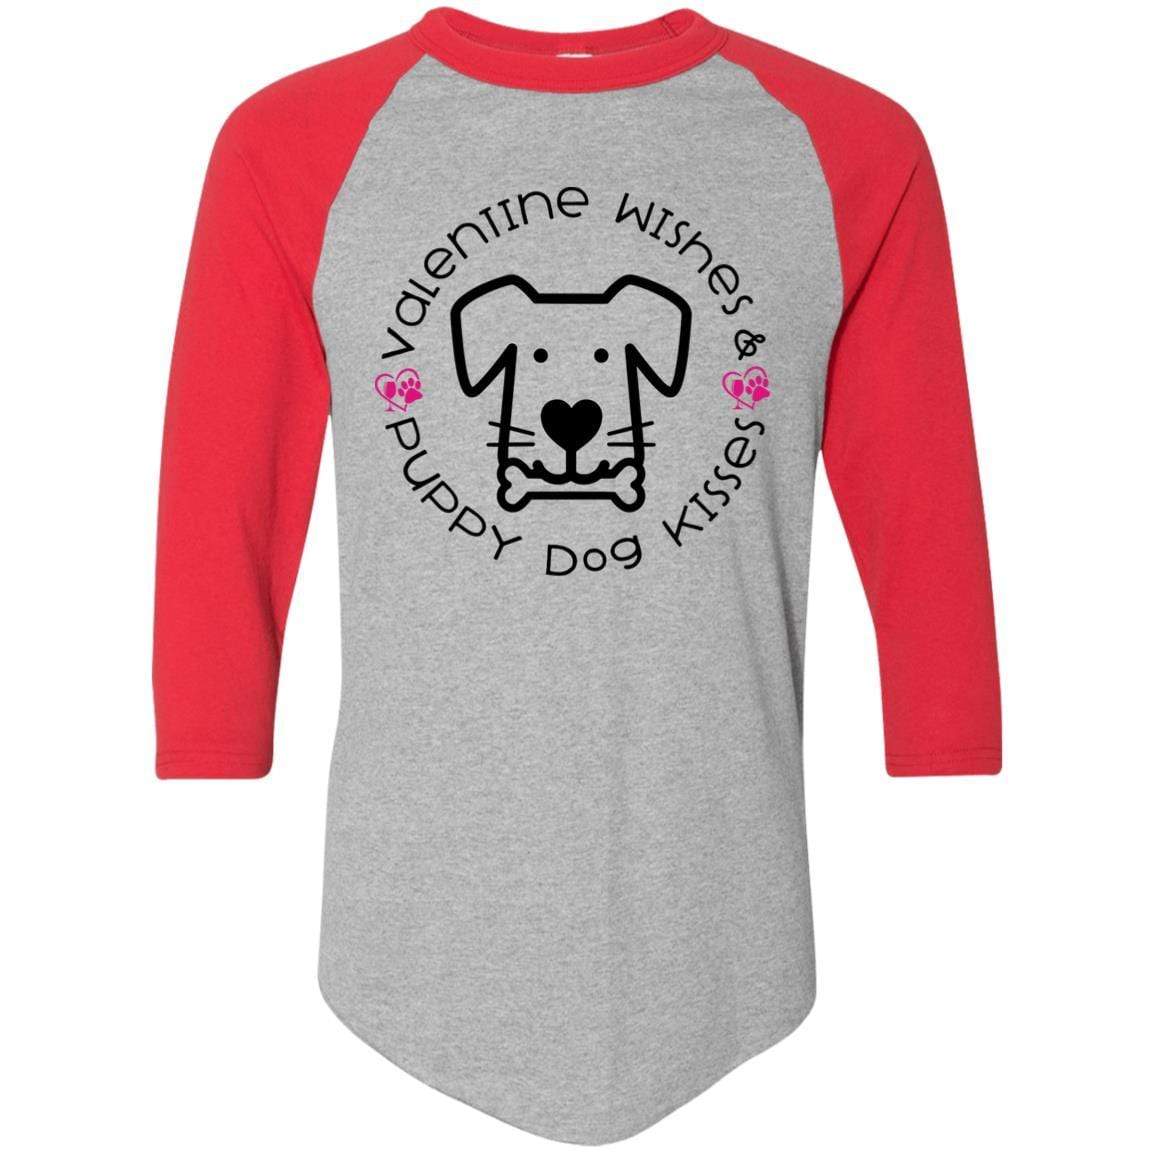 T-Shirts Athletic Heather/Red / S Winey Bitches Co 'Valentine Wishes and Puppy Dog Kisses" (Dog) Colorblock Raglan Jersey WineyBitchesCo